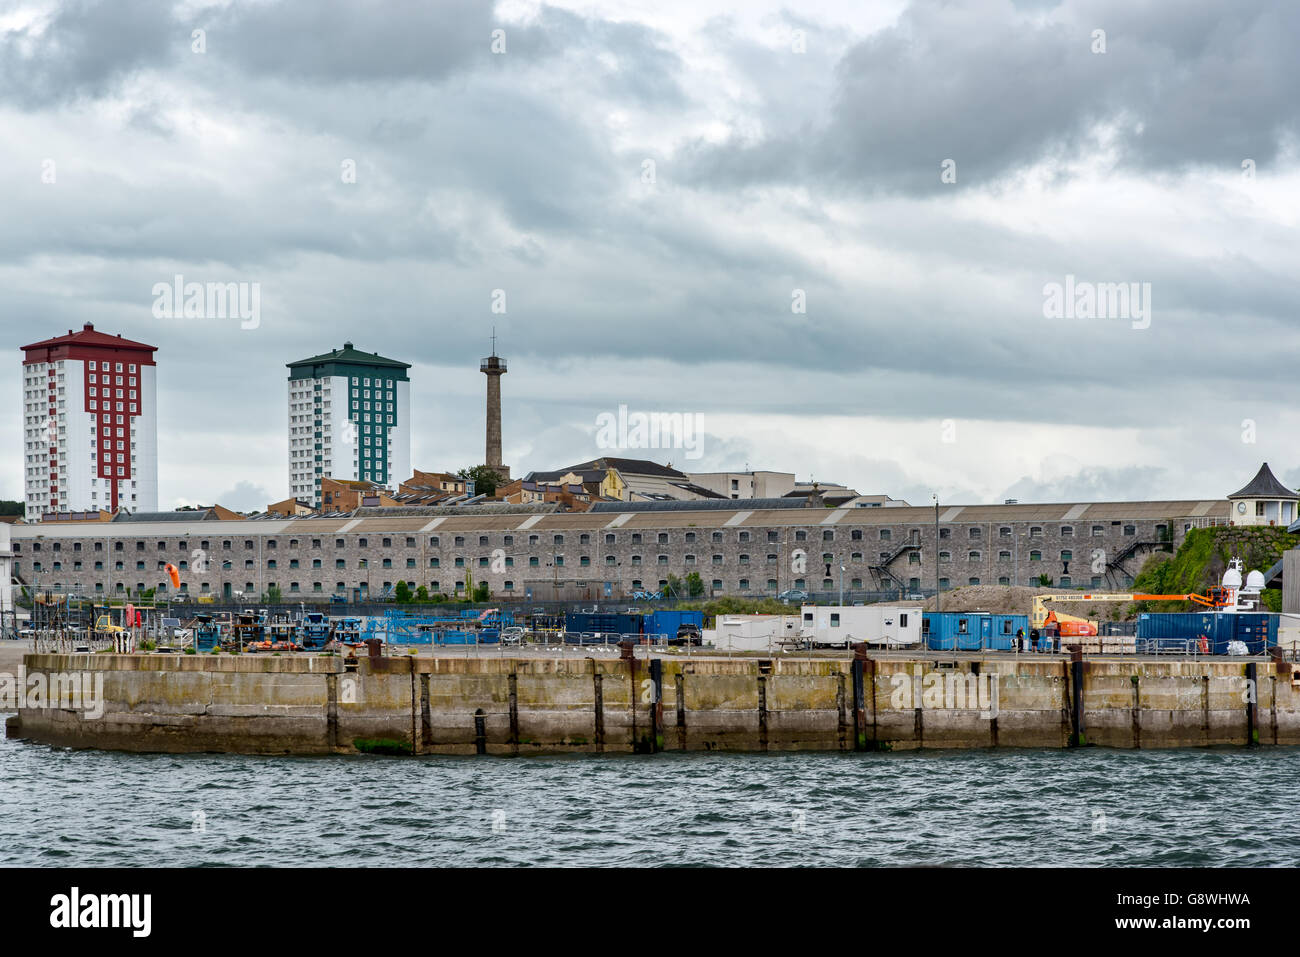 The Ropewalk in Devonport Dockyard, Plymouth.  Formerly used for the manufacture of ropes for Naval Ships. Stock Photo